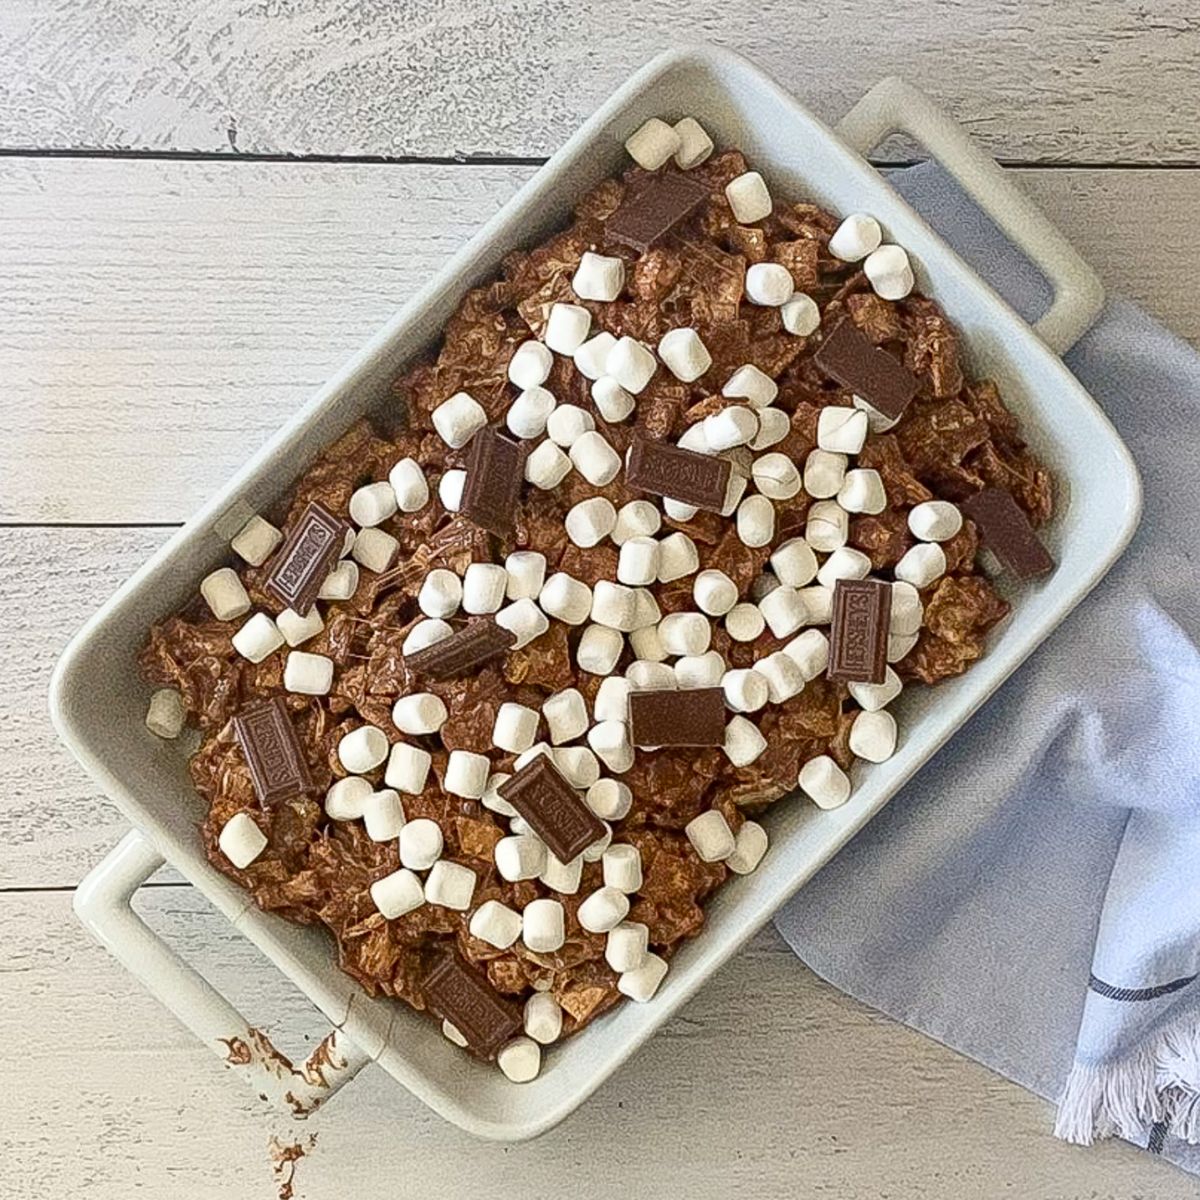 chocolate pieces and mini marshmallows sprinkled on top of s'more bars.